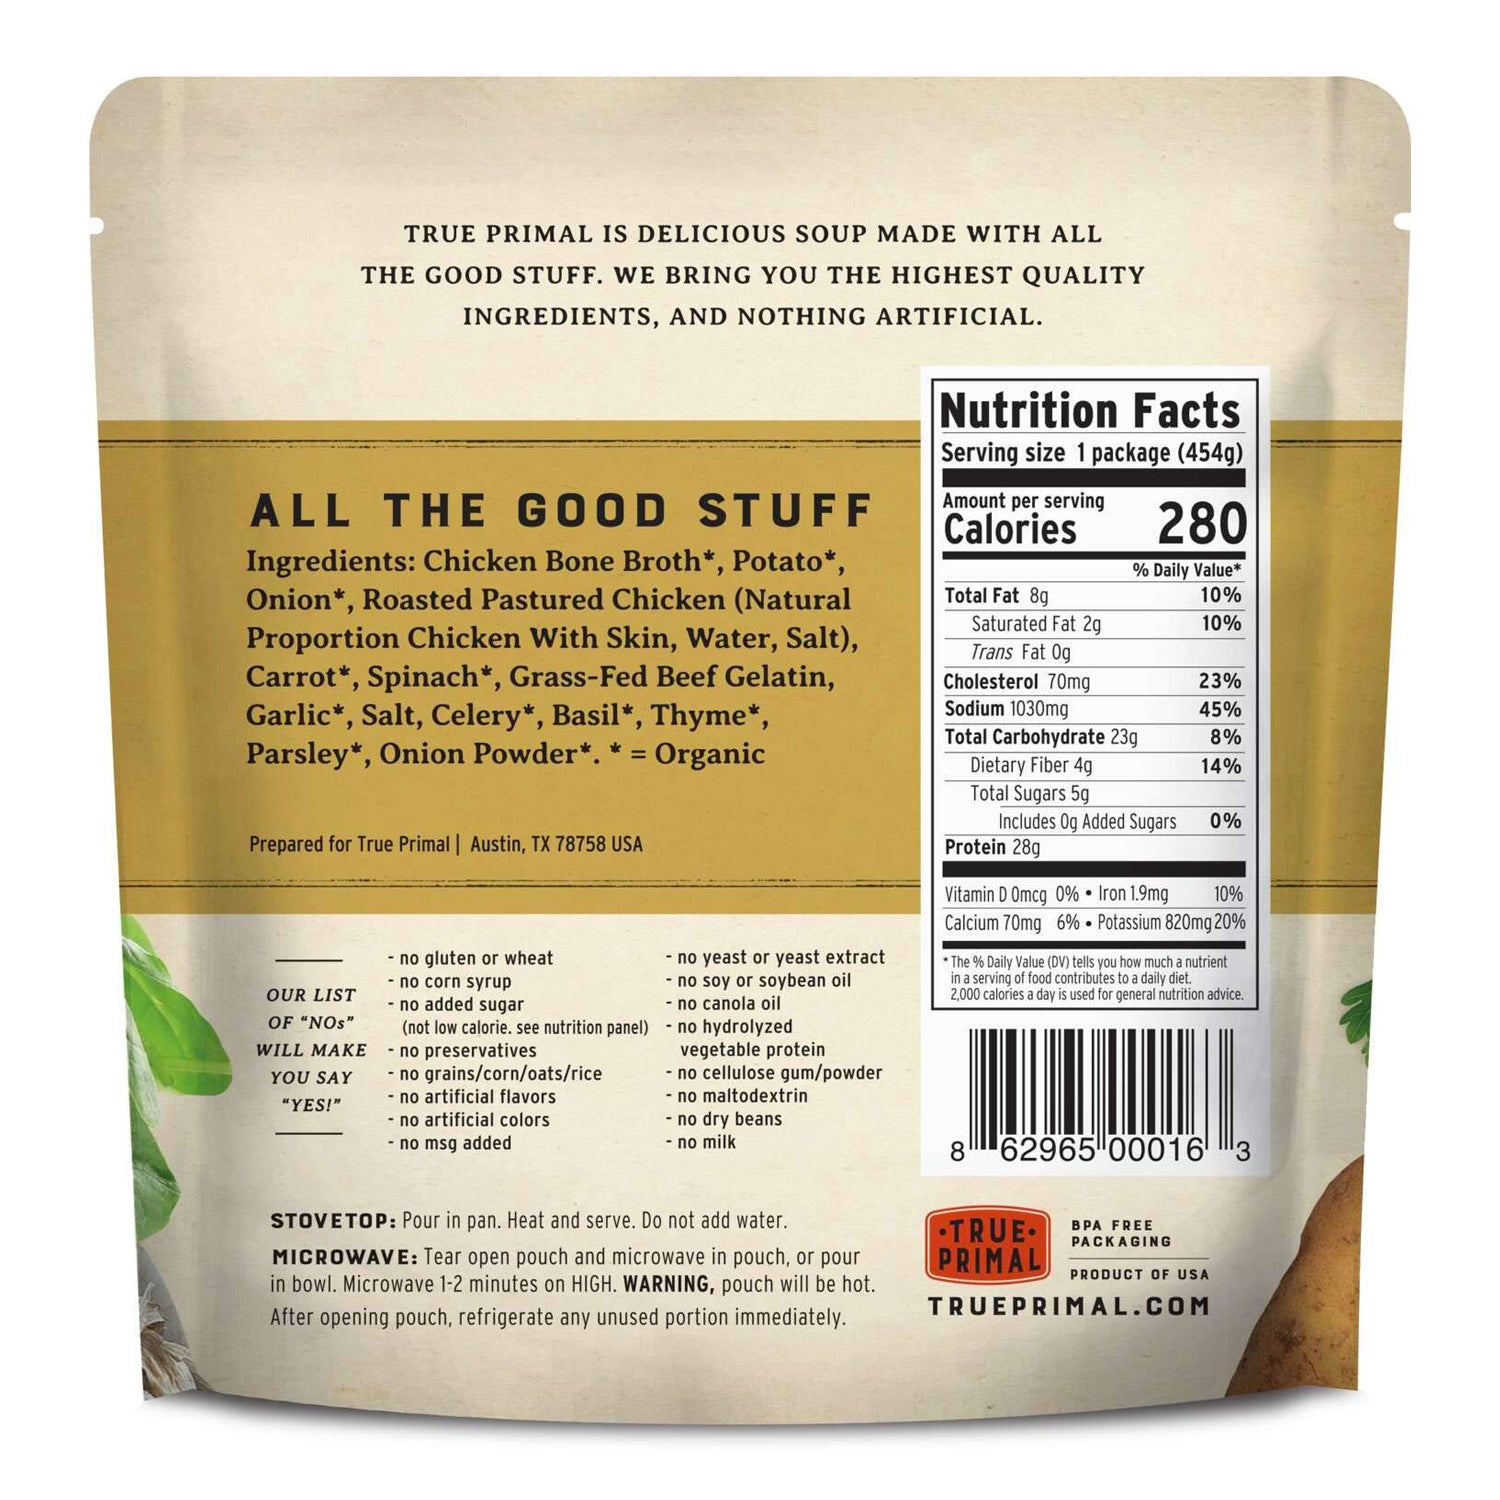  True Primal Roasted Chicken Soup 8-pack, Ready to eat